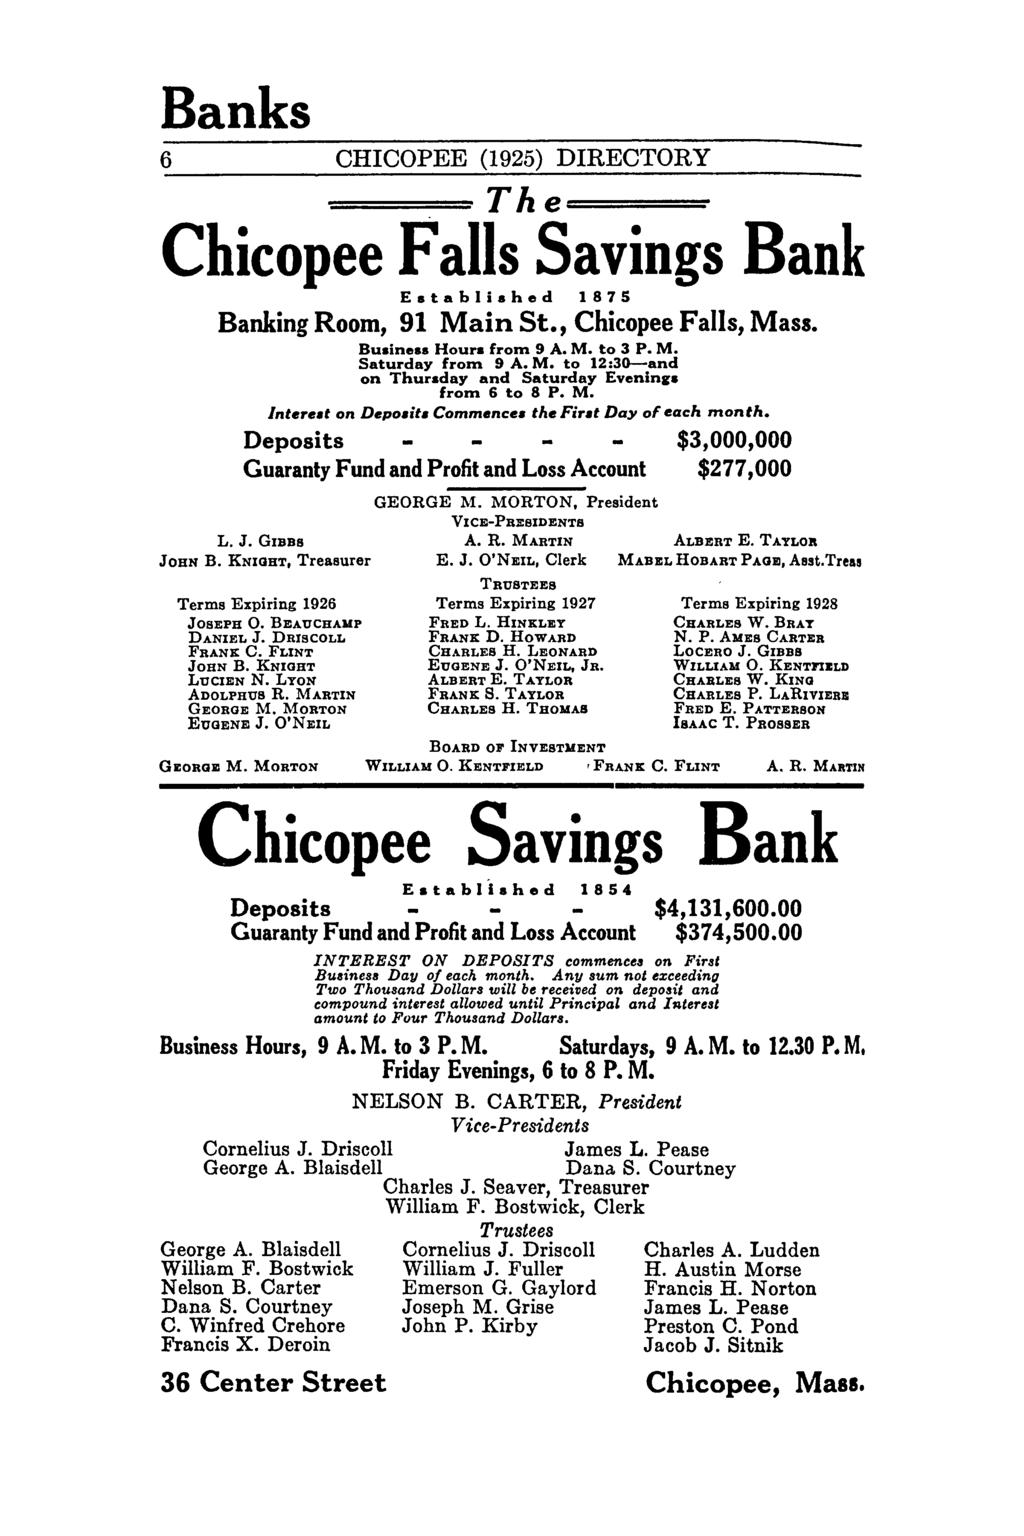 Banks 6 CHICOPEE (1925) DIRECTORY The===- Chicopee Savings Bank Established 1875 Banking Room, 91 Main St., Chicopee, Mass. Bu.ine.s Hour. from 9 A. M. to 3 P. M. Saturday from 9 A. M. to 12:3G-and on Thursday and Saturday Evenin".